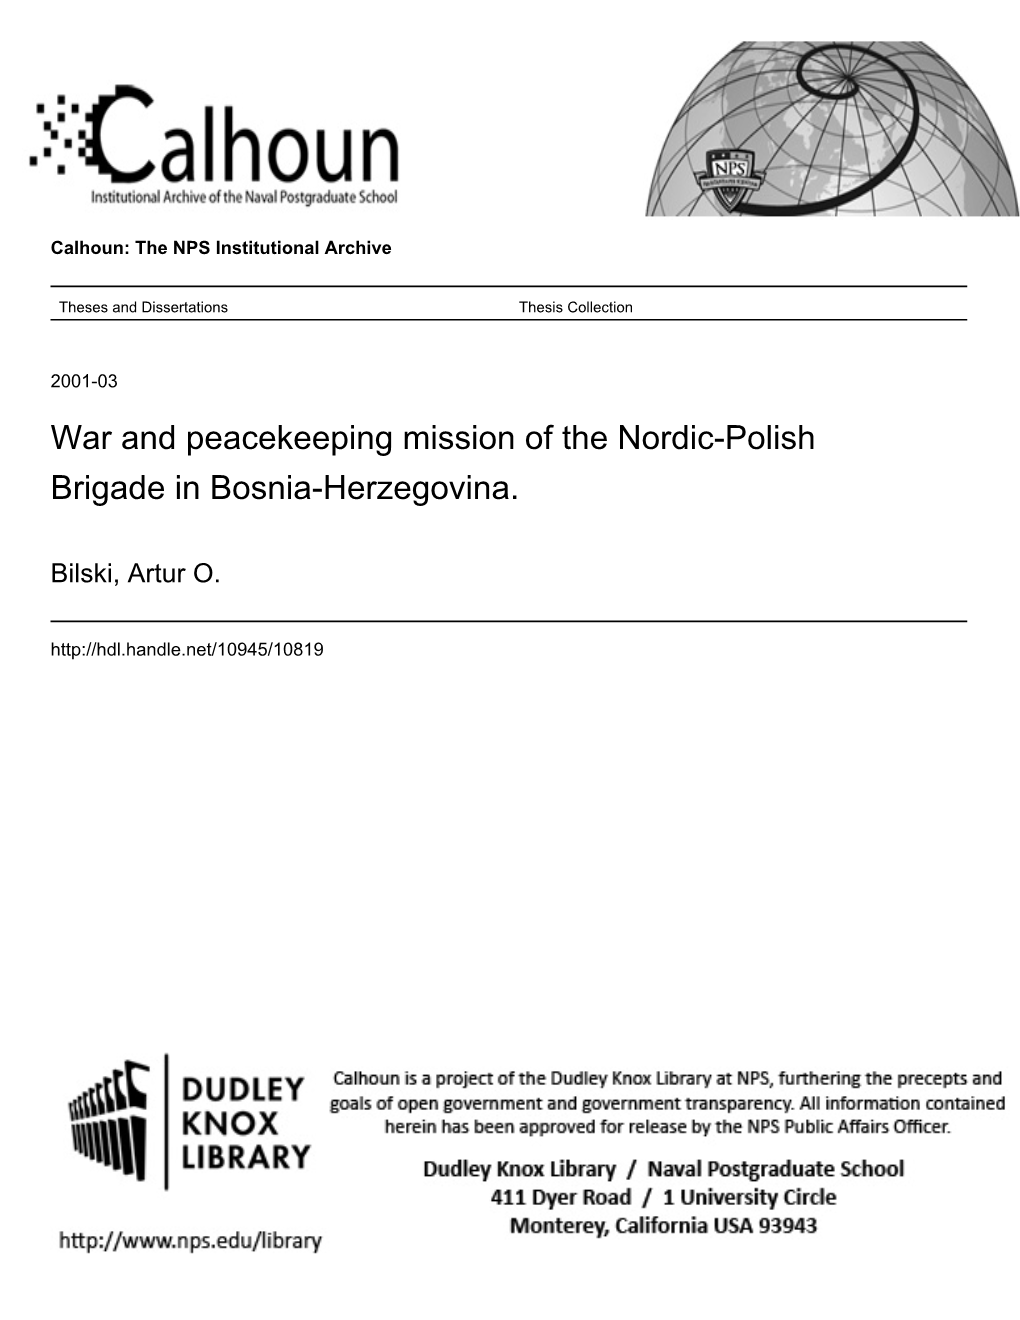 War and Peacekeeping Mission of the Nordic-Polish Brigade in Bosnia-Herzegovina